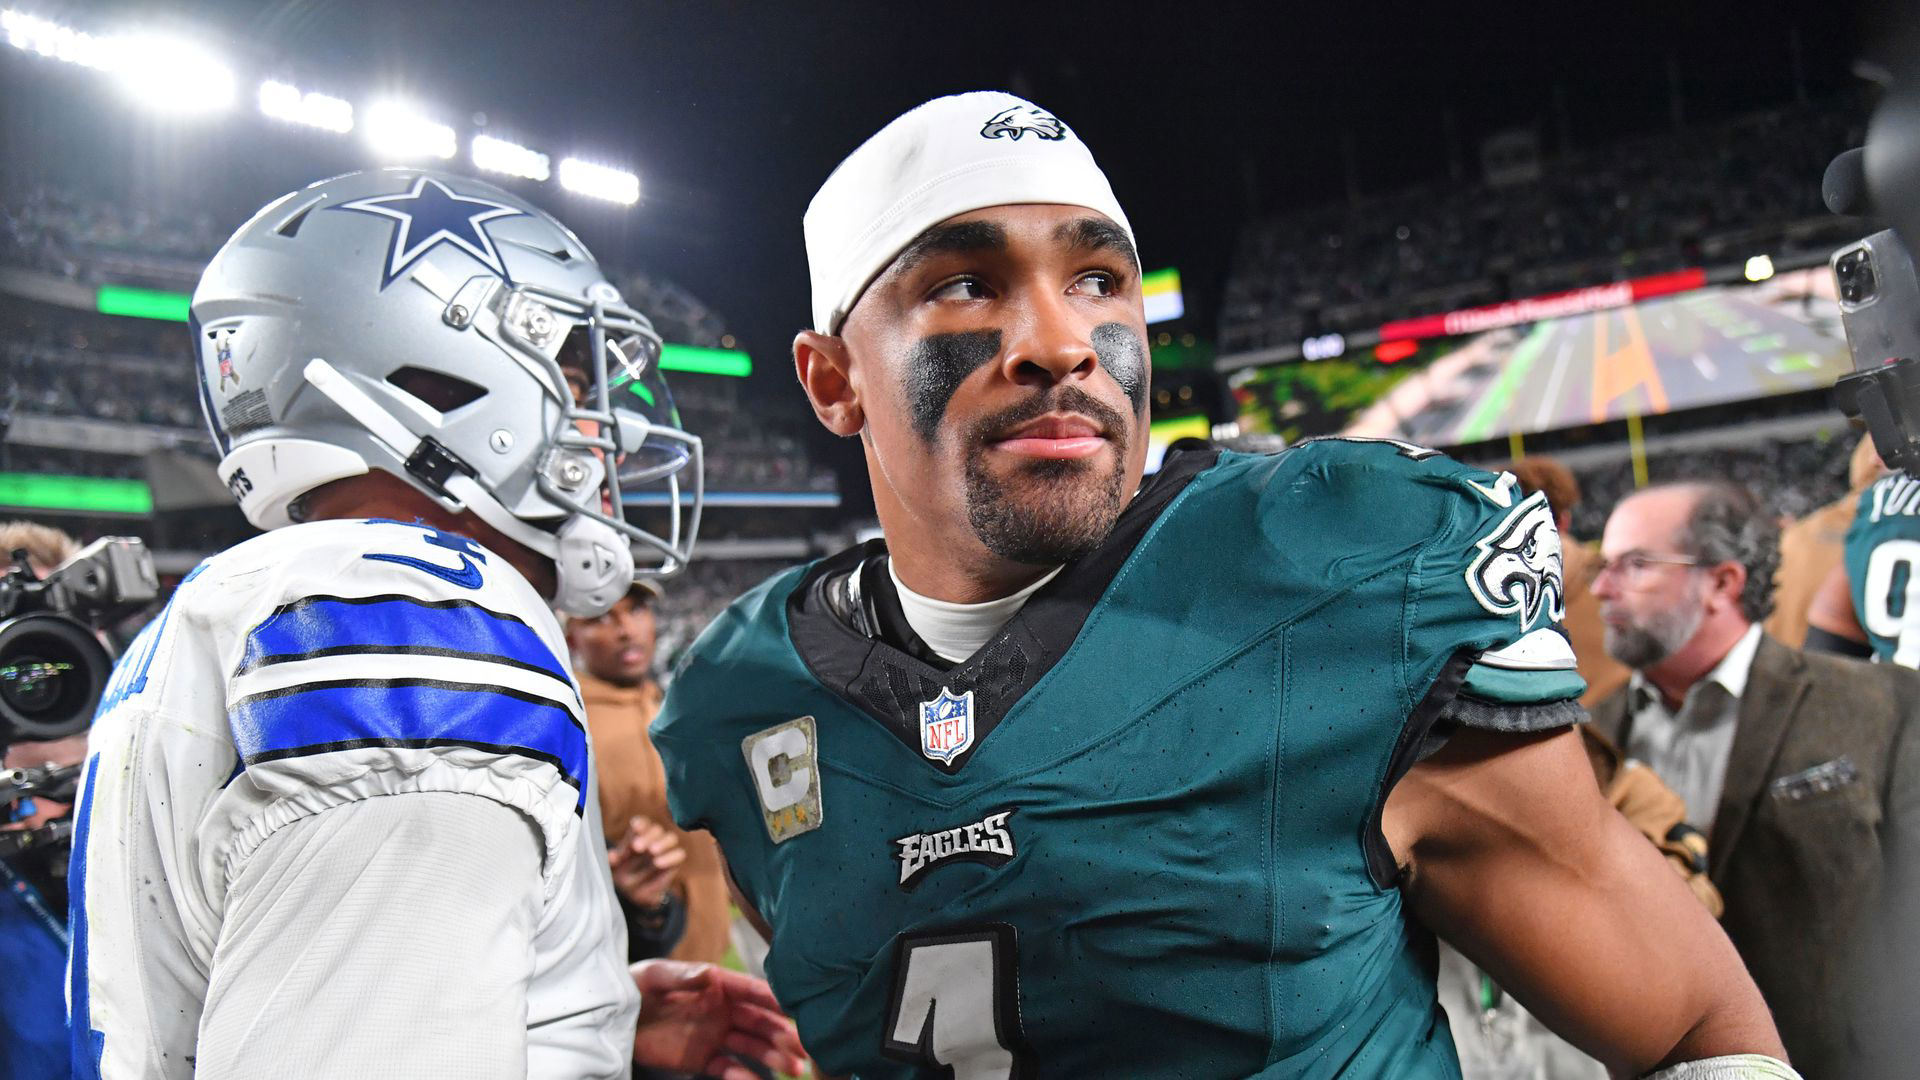 Eagles vs. Cowboys: The good, the bad, and the ugly